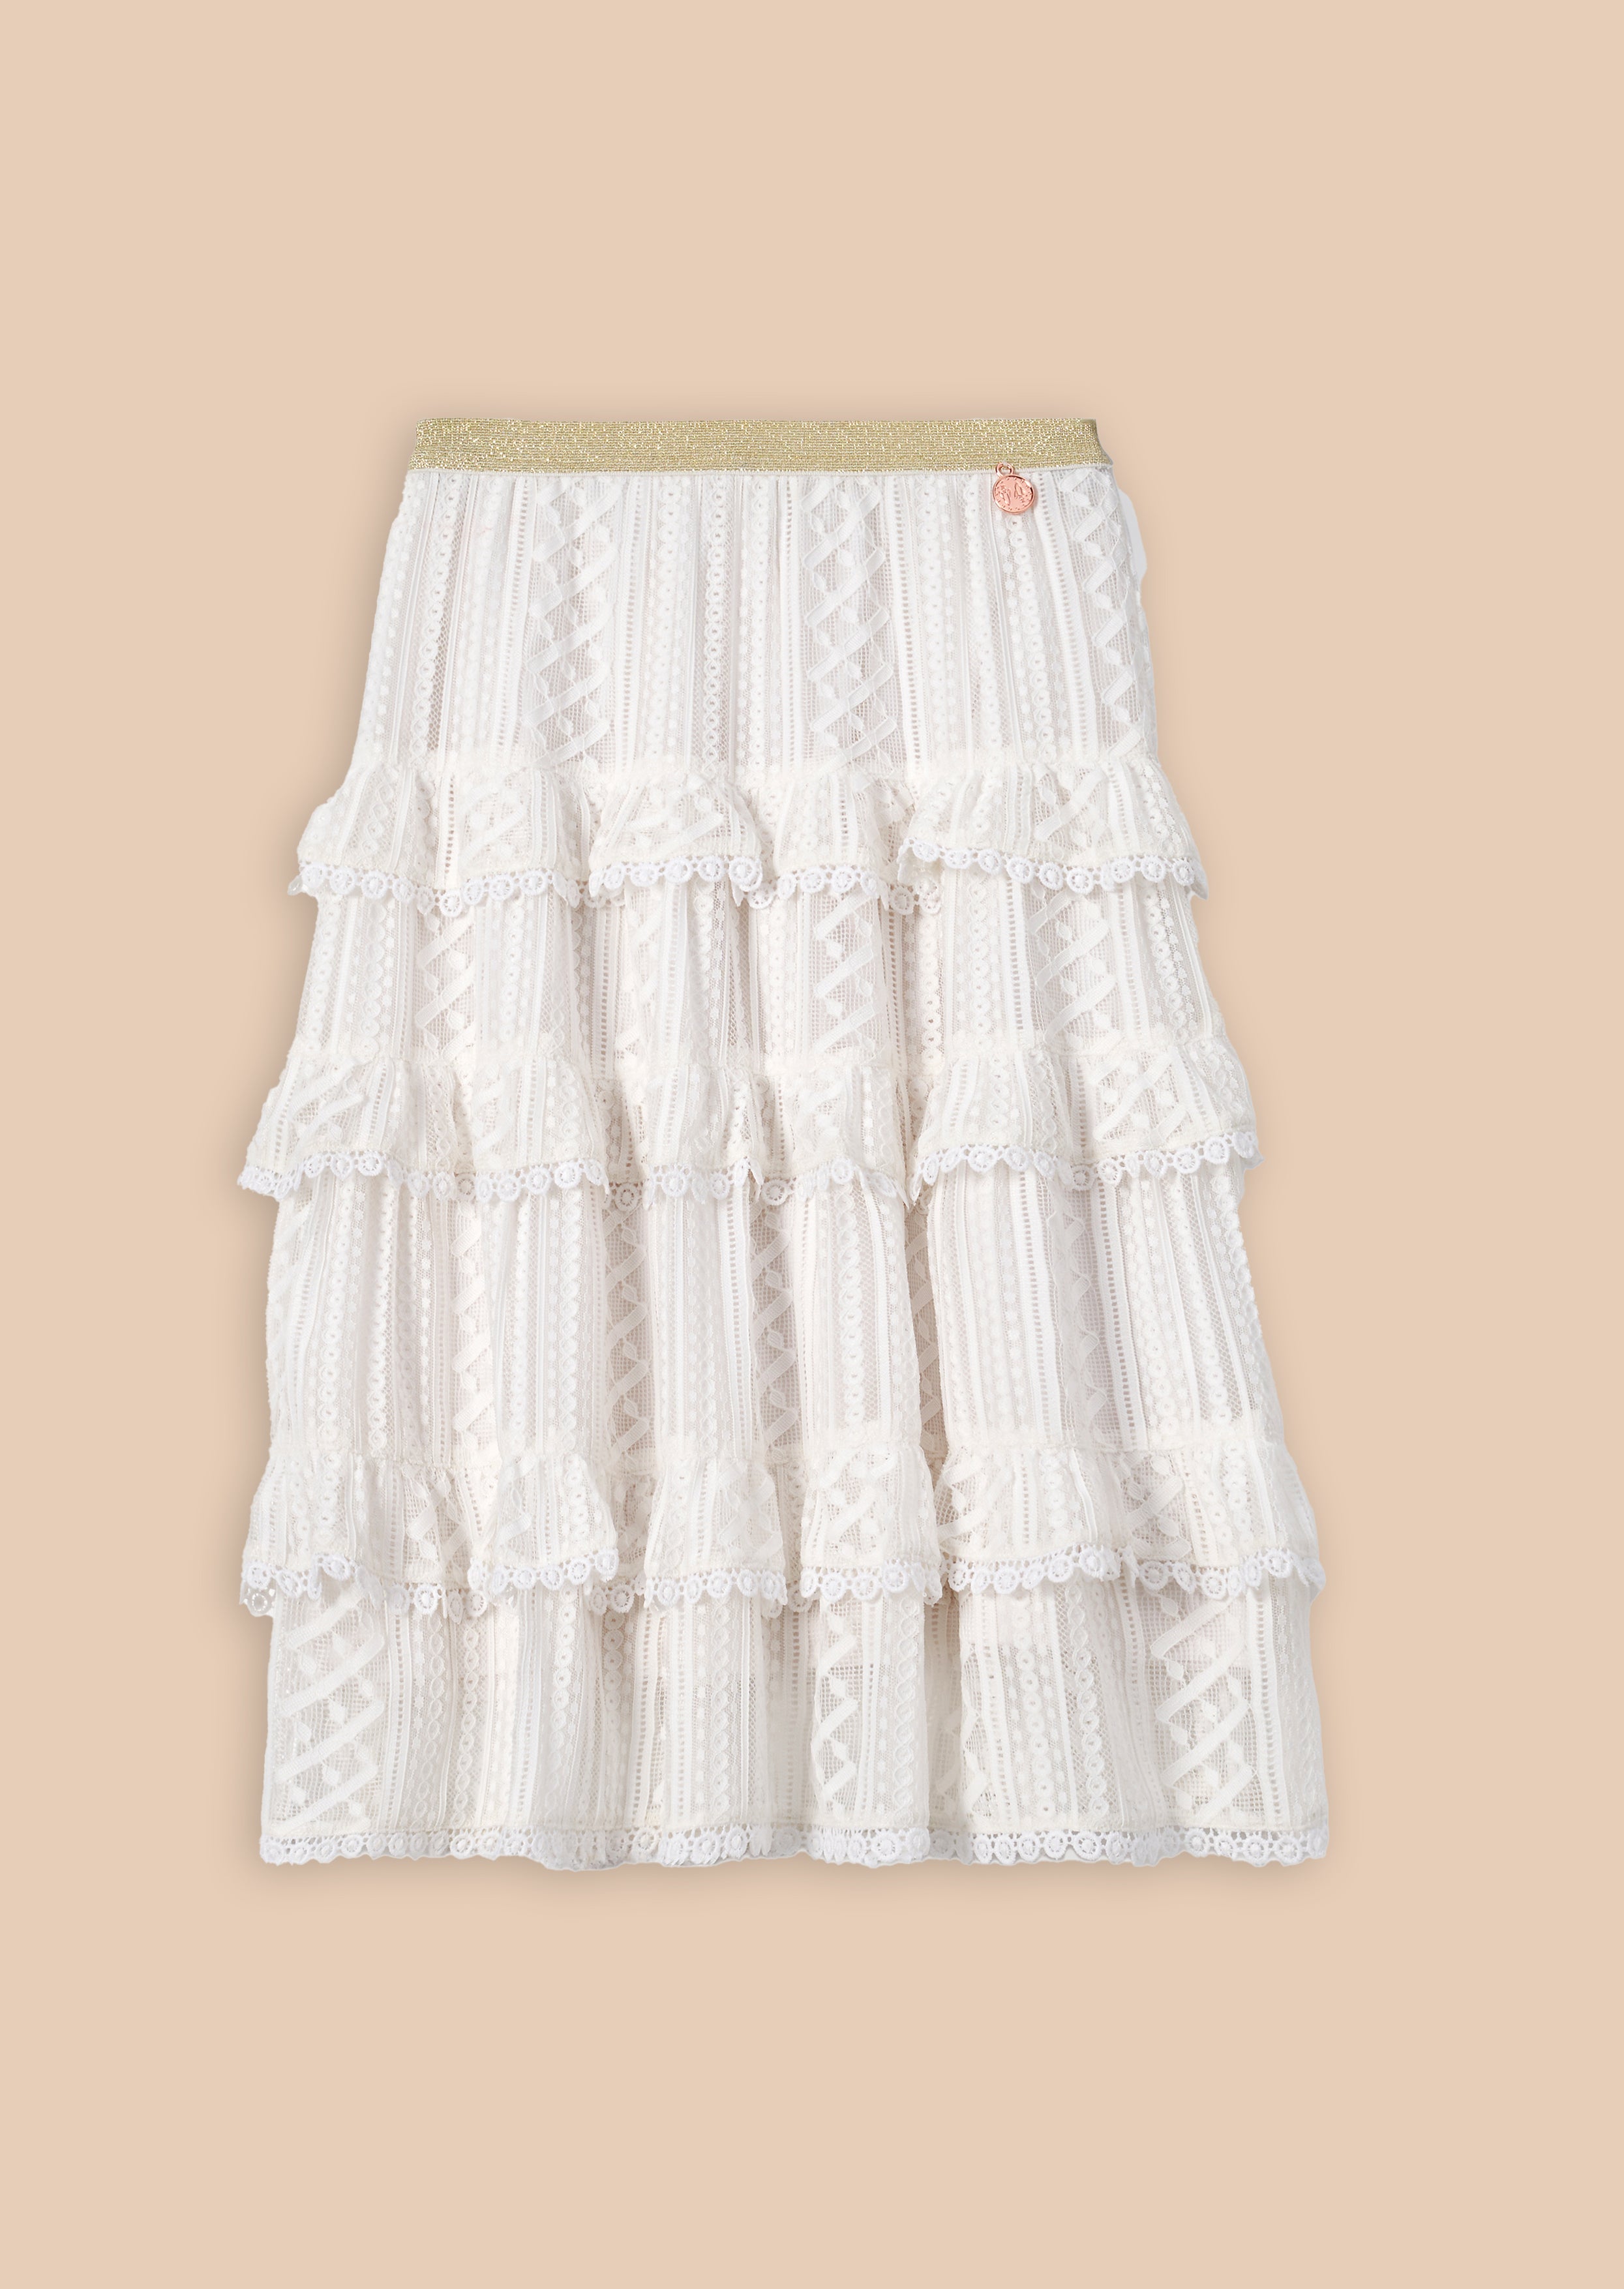 Annabelle Ivory Lace Ruffle Skirt